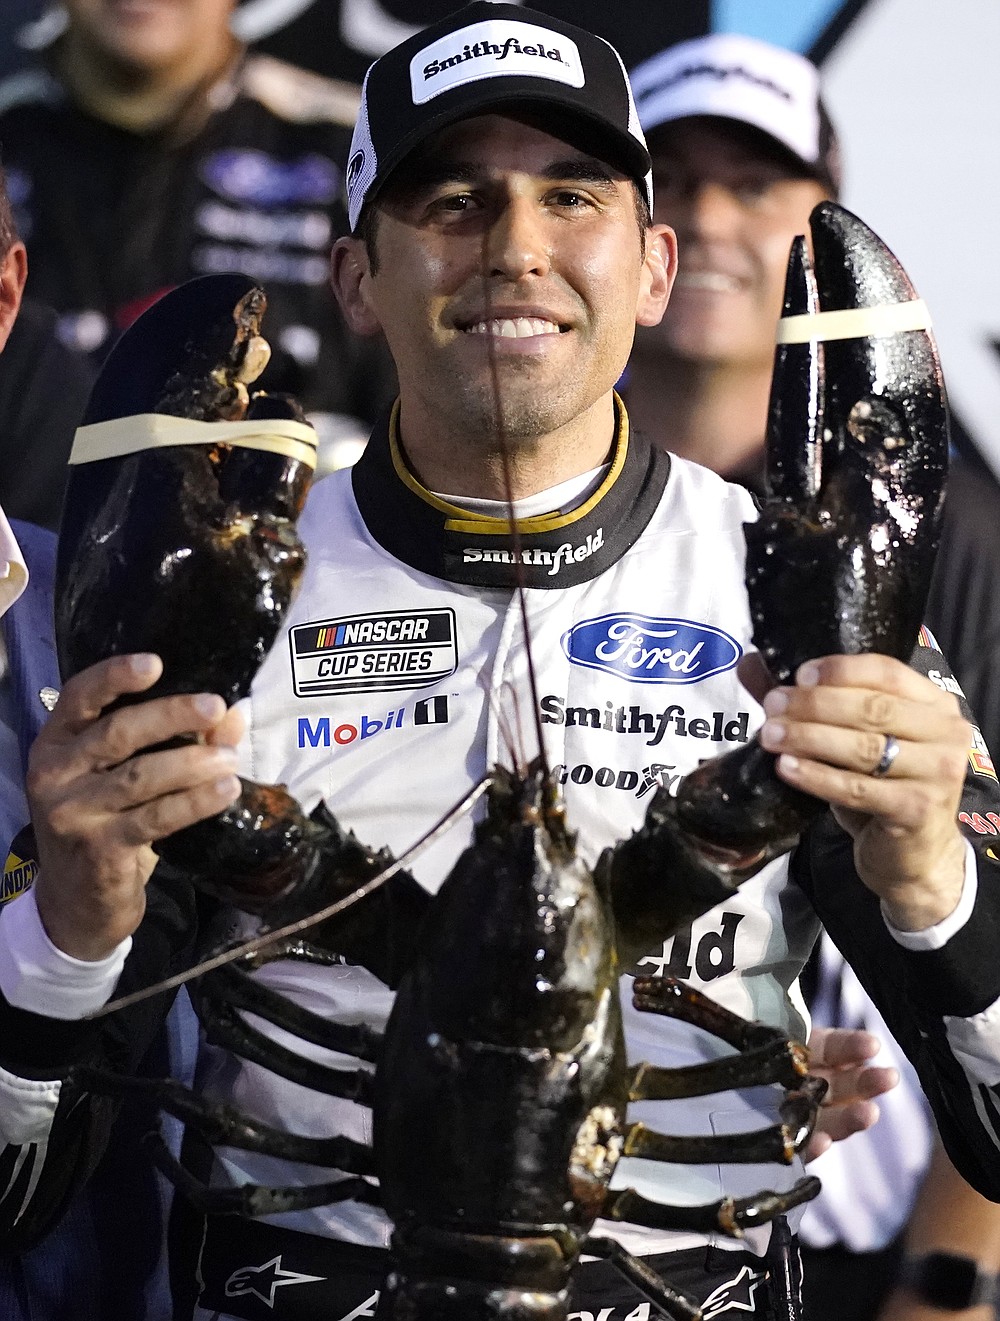 Aric Almirola smiles as he wields a giant lobster after winning the NASCAR Cup Series car race on Sunday July 18, 2021 in Loudon, NH (AP Photo / Charles Krupa)